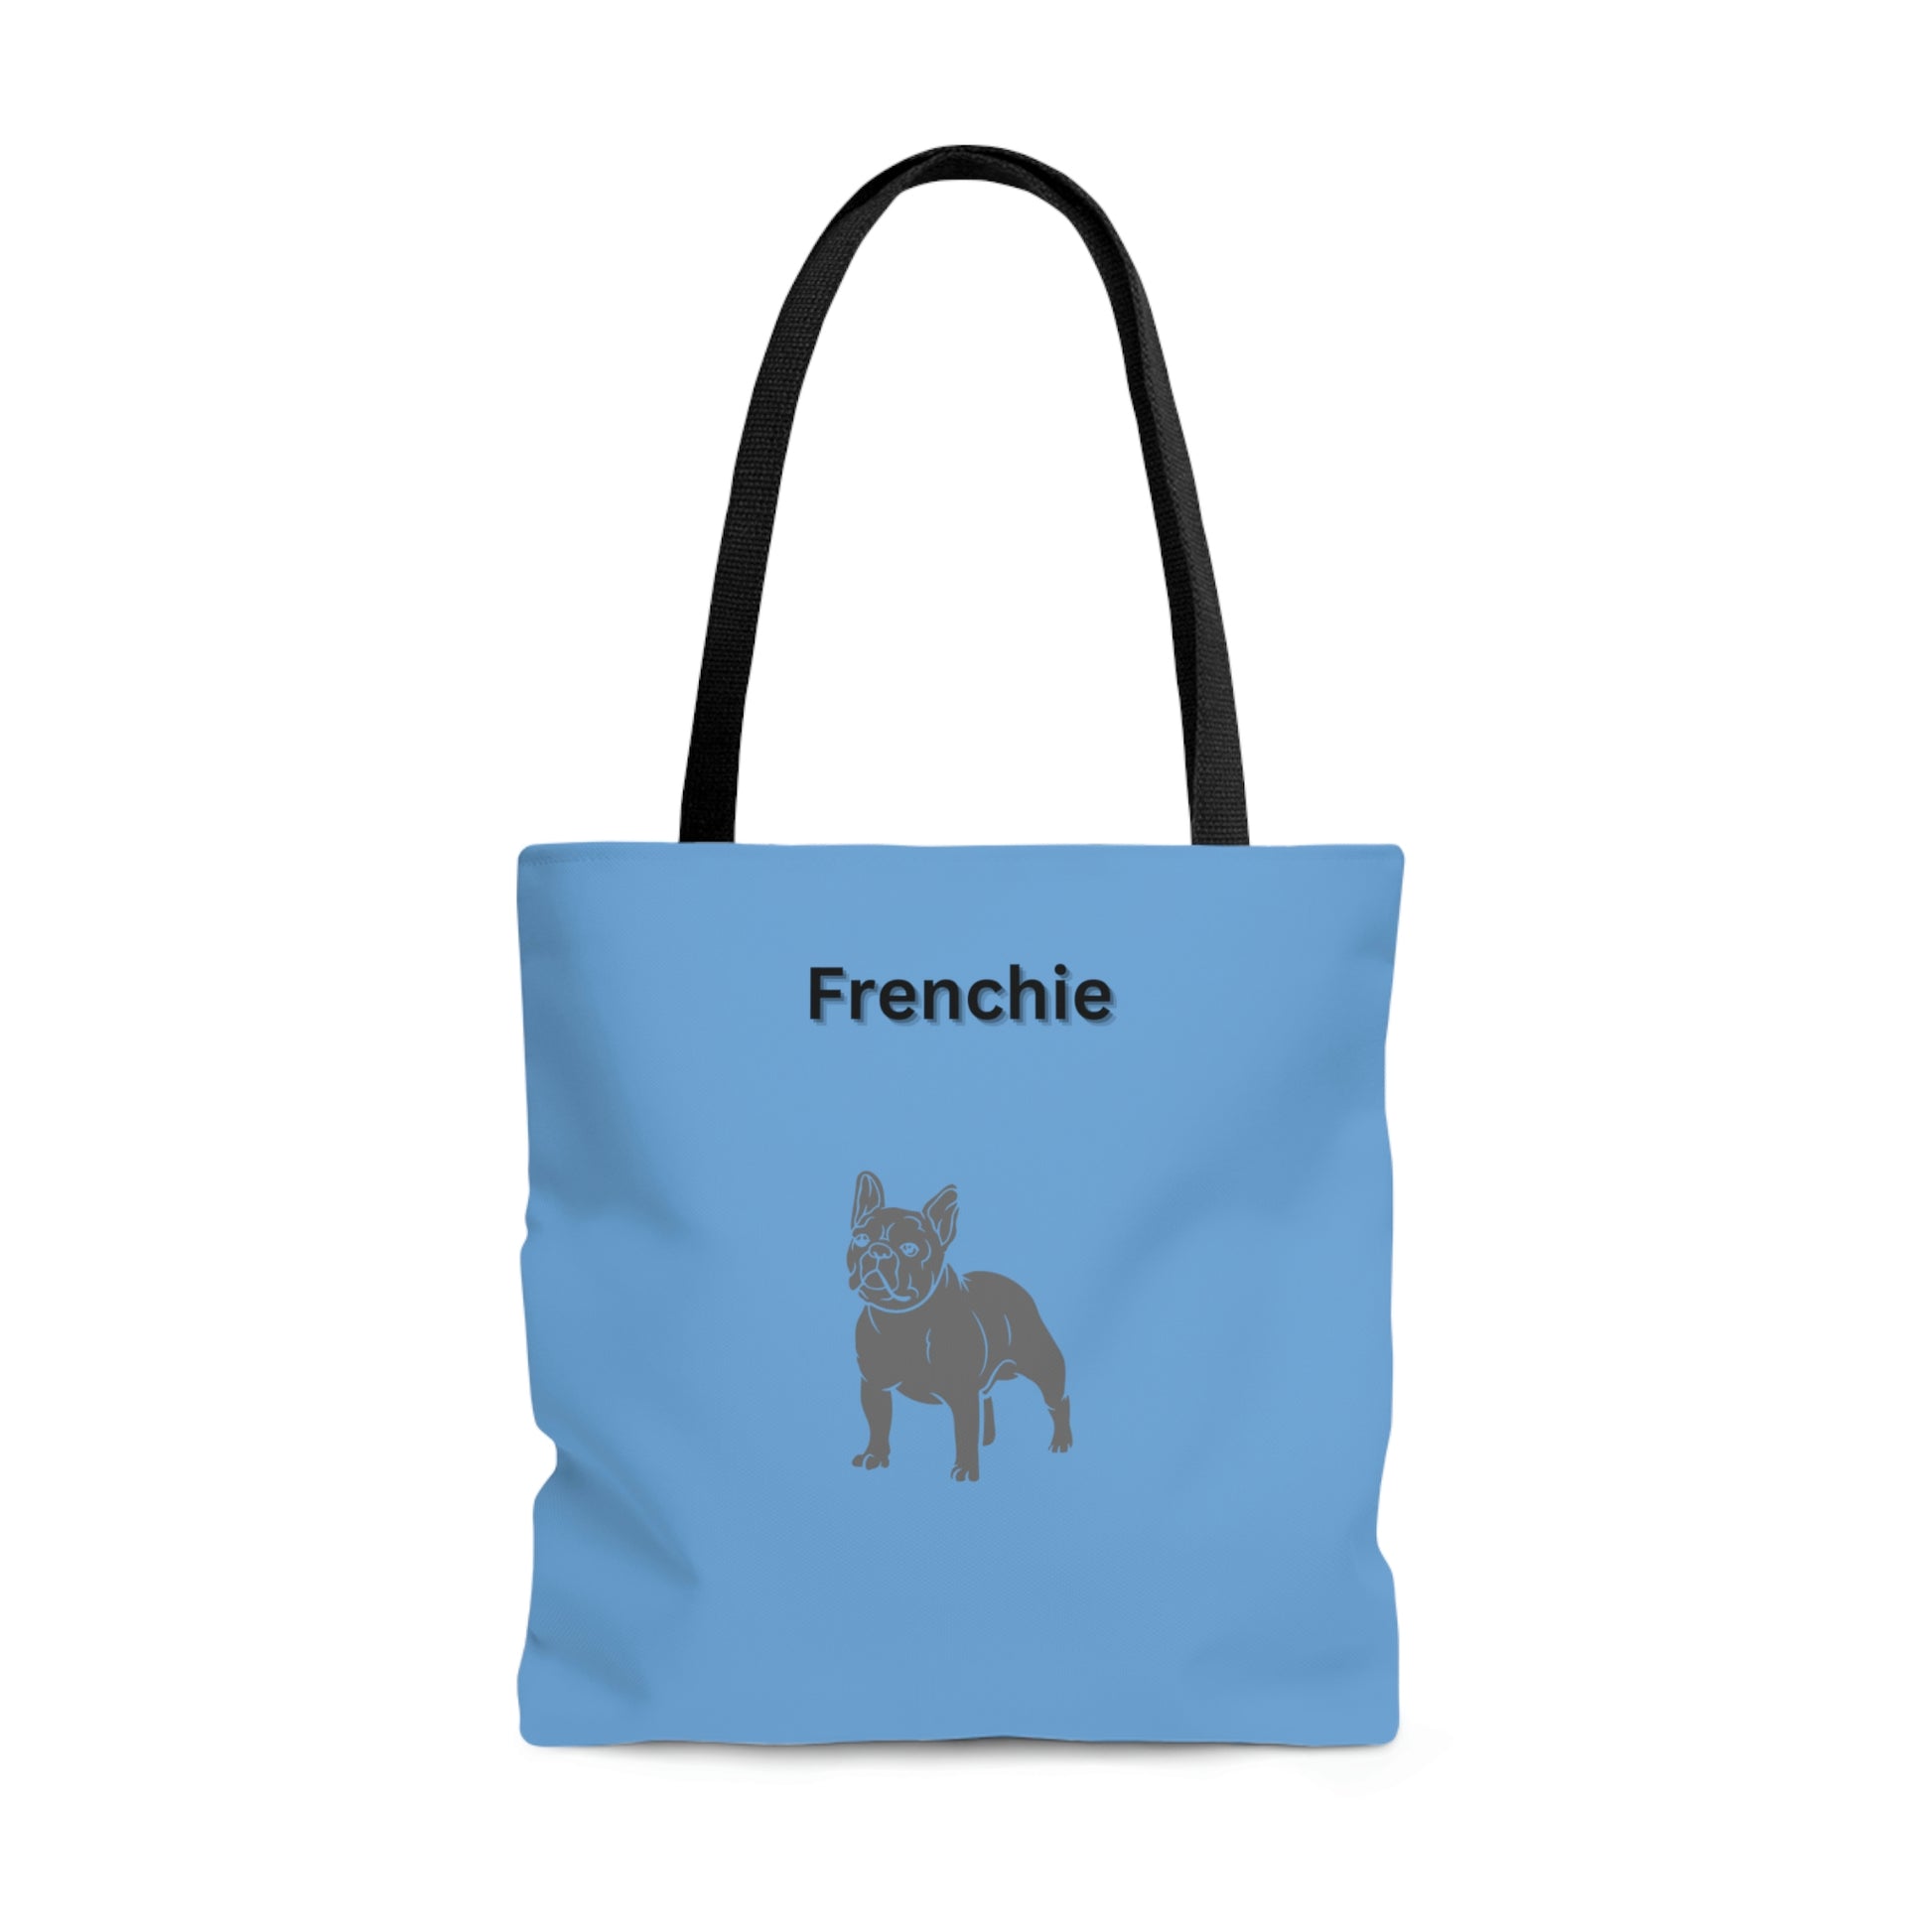 Frenchie Blue Tote Bag | BKLA | shoes & accessories | backpack, hat, phone cover, tote bags, clutch bags